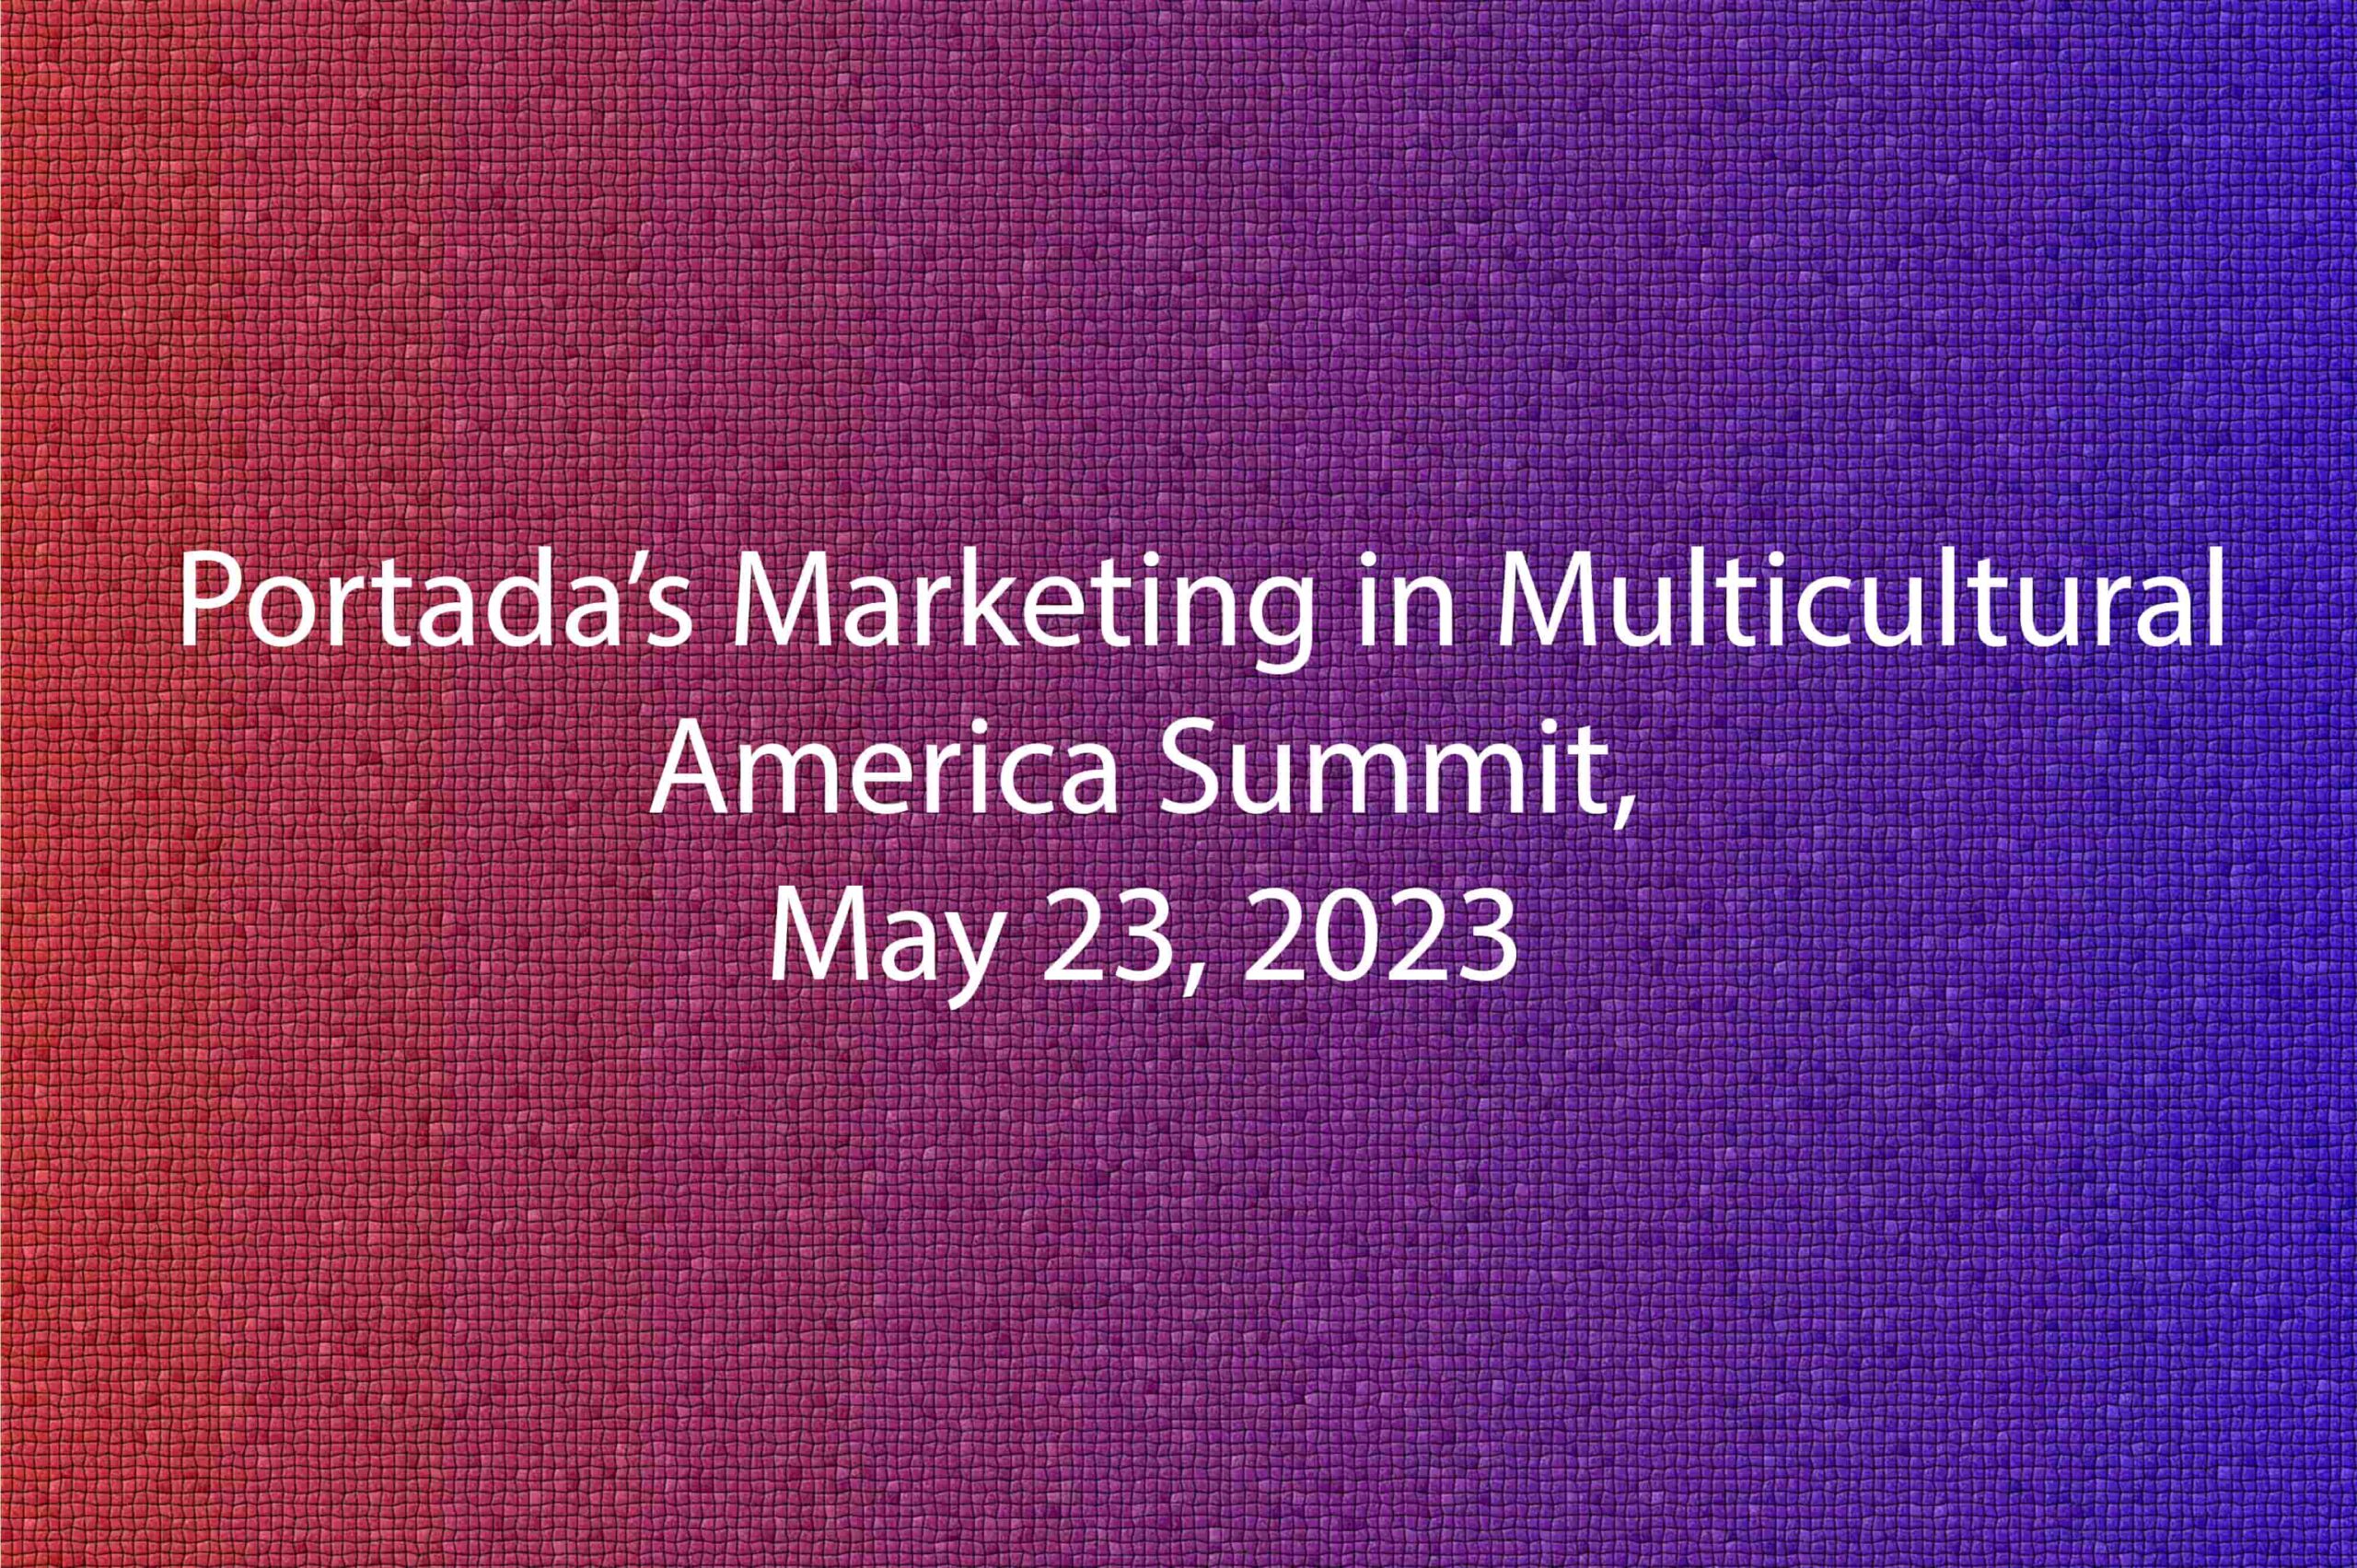  Marketing in Multicultural America Summit, May 23 